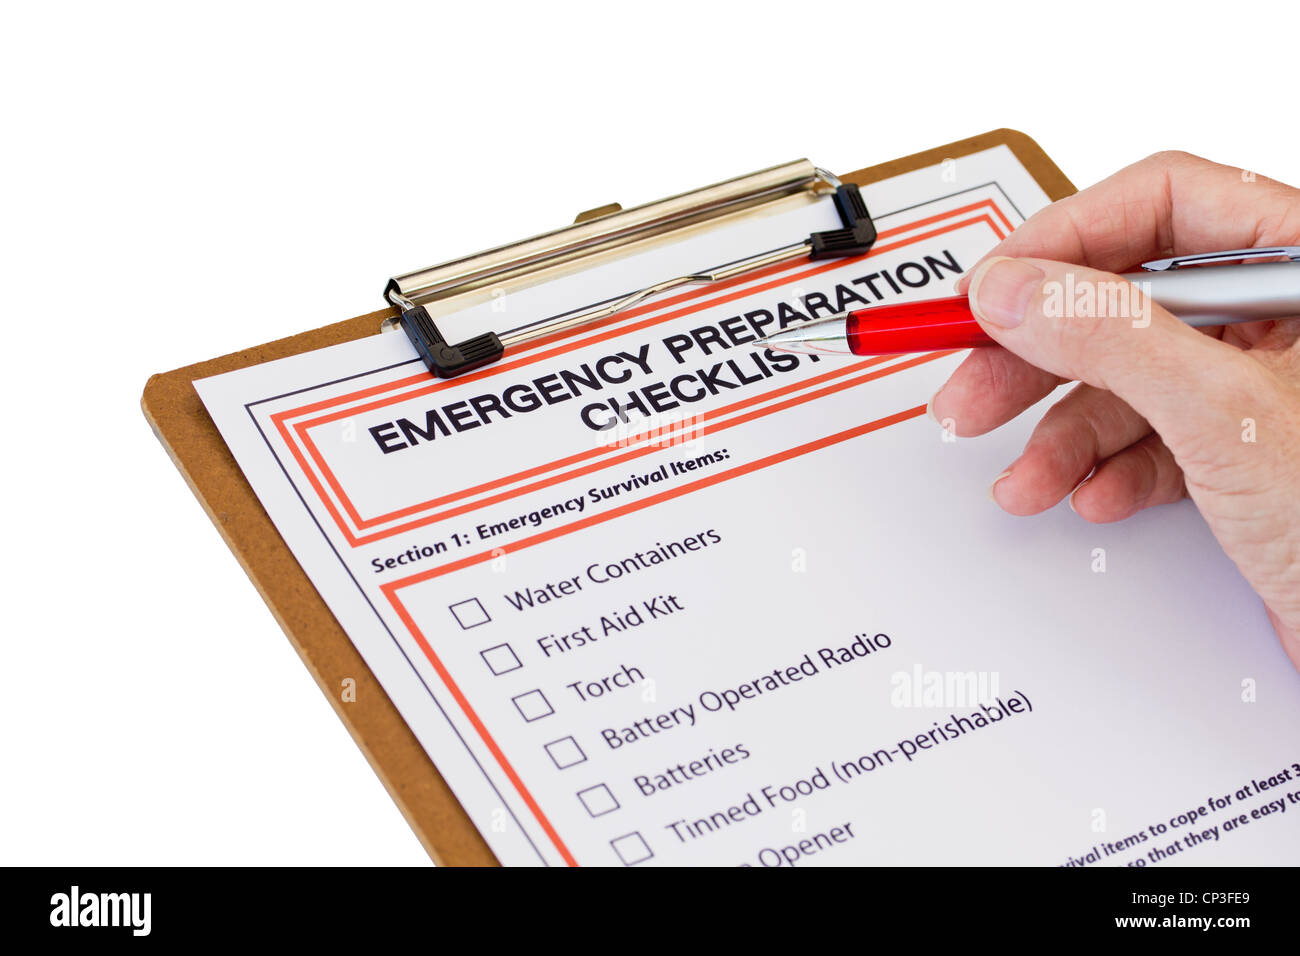 Hand completing Emergency Preparation List Stock Photo